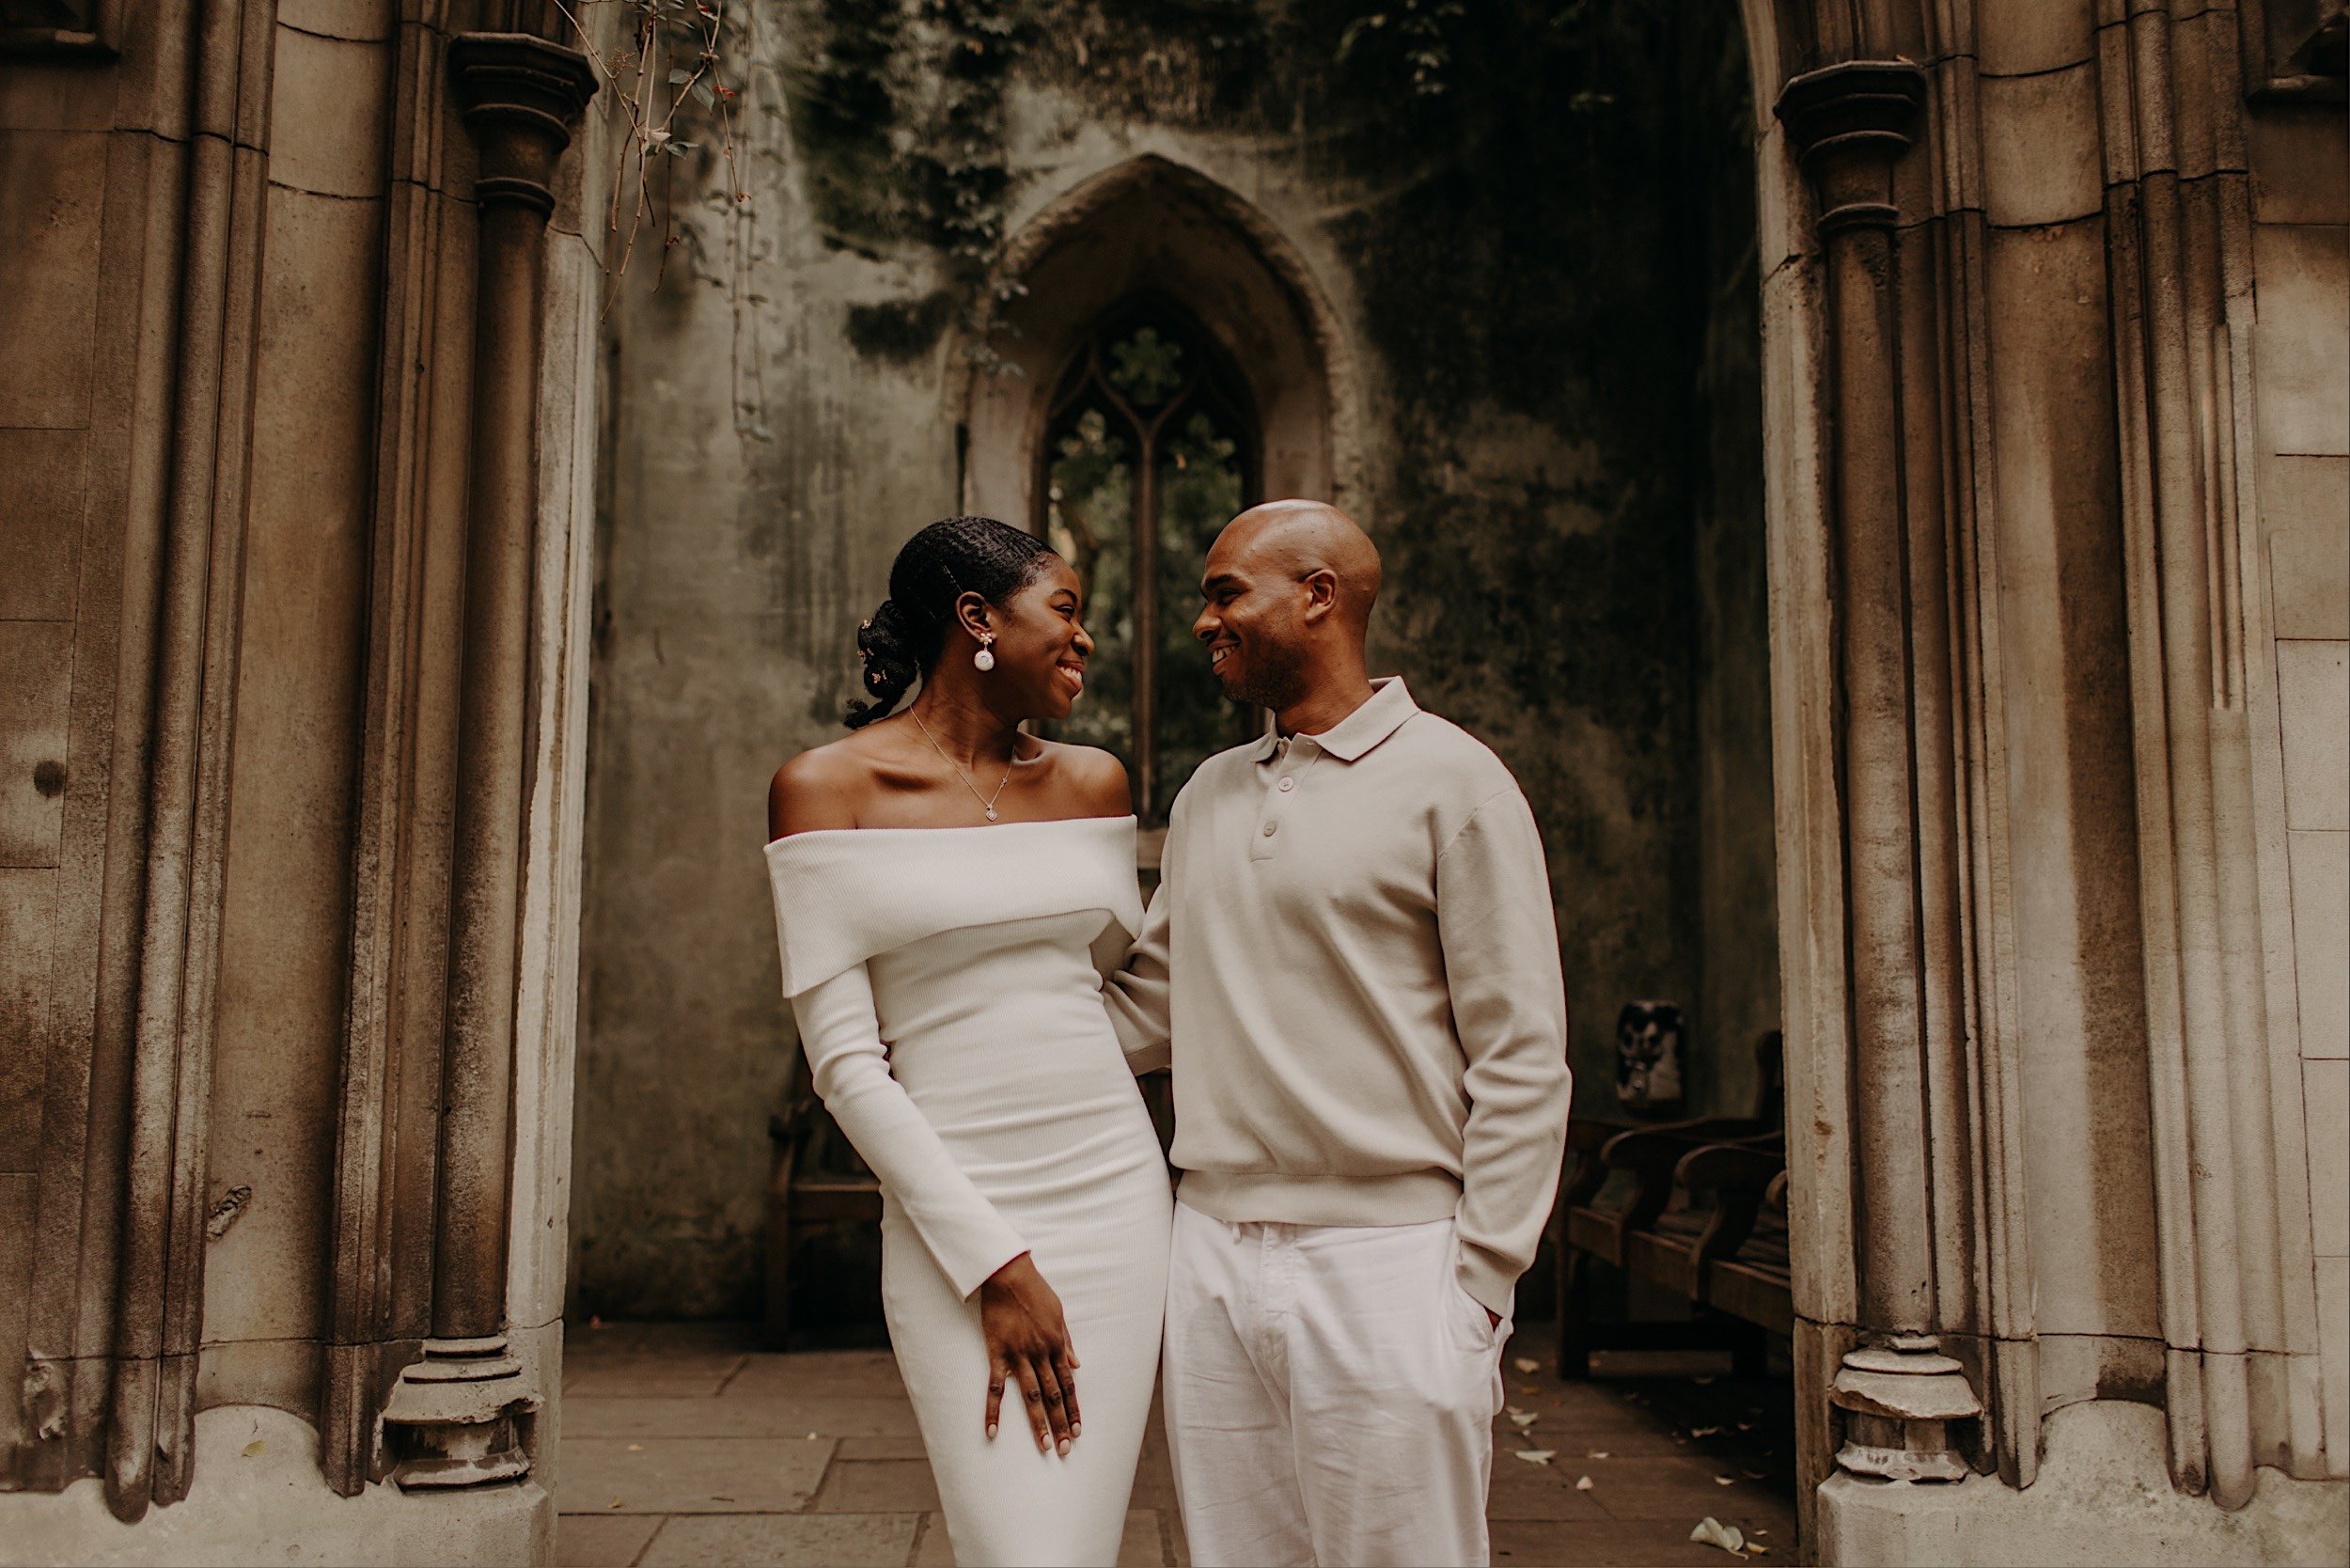 16_St-Dunstans-in-the-east-pre-wedding-shoot0021_Gorgeous black couple in love share a joke in st dunstan in the east.jpg